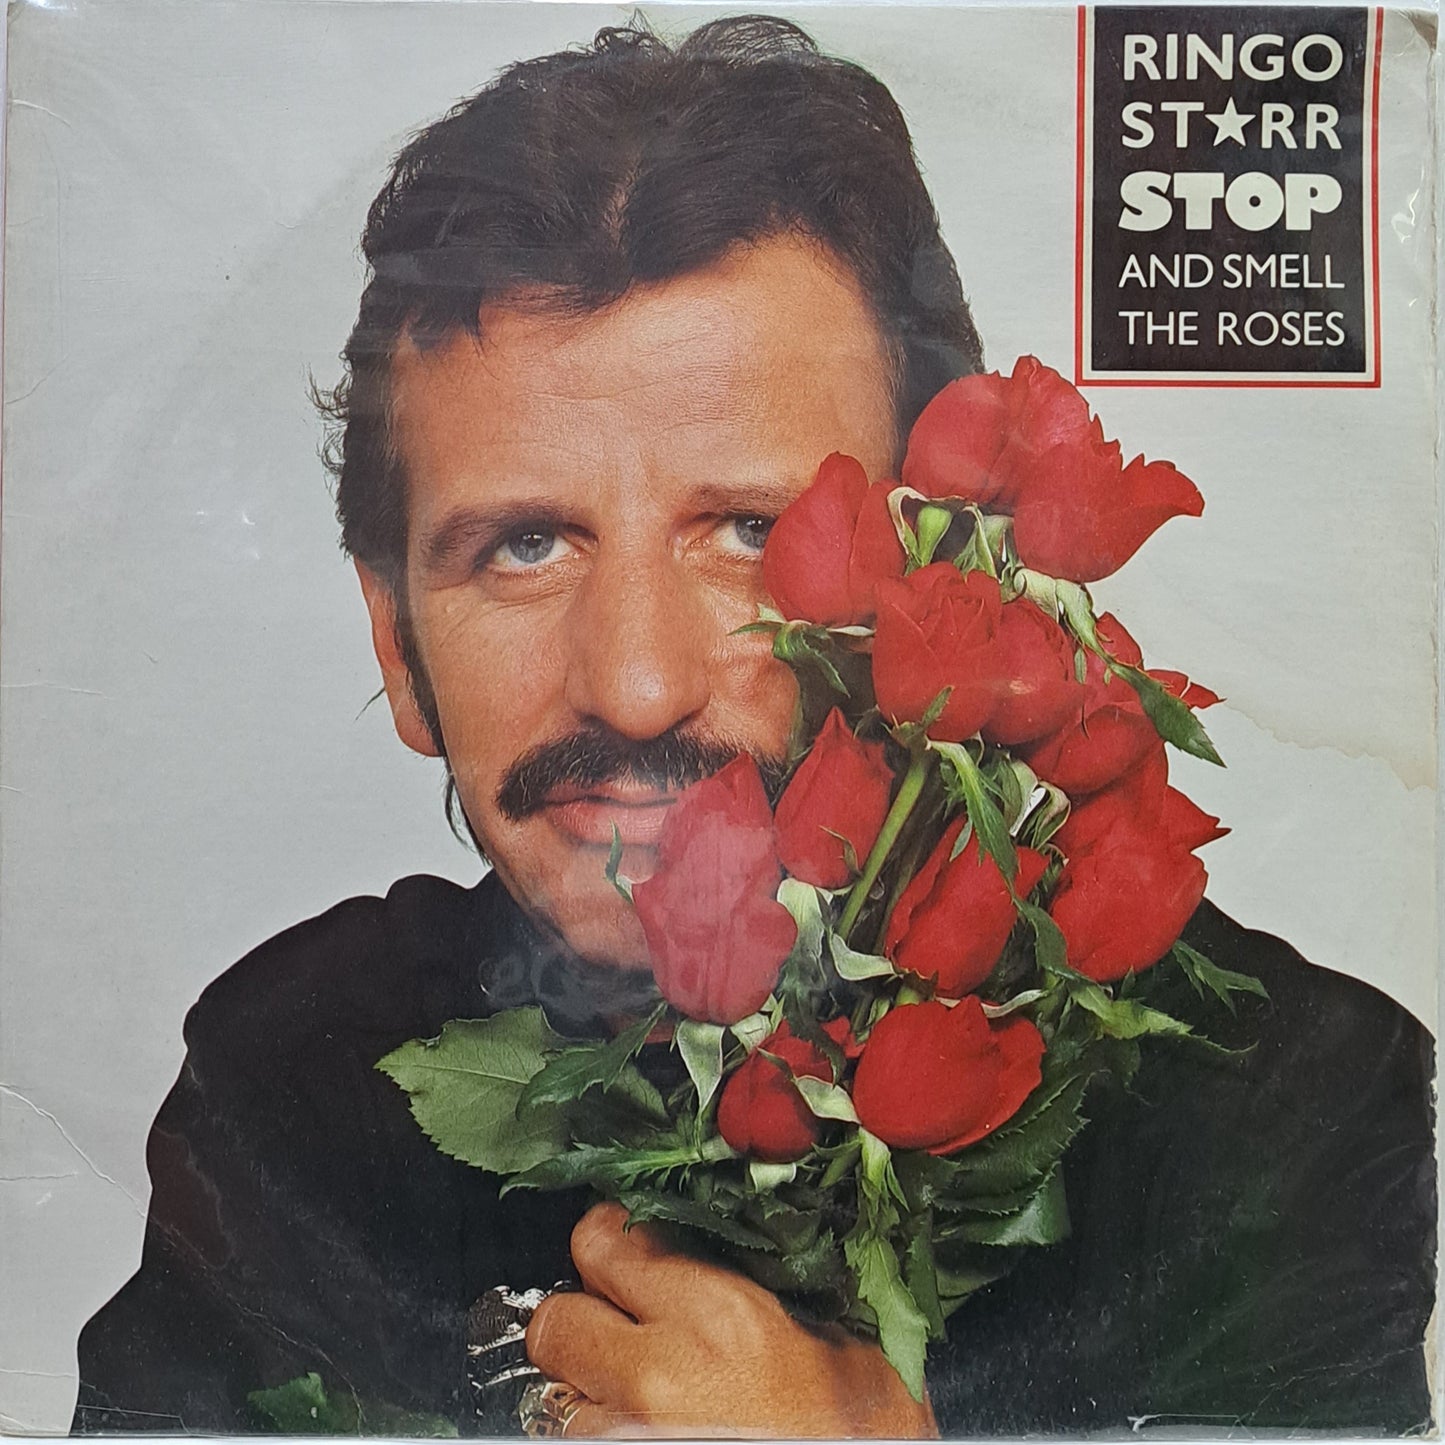 RINGO STARR - STOP AND SMELL THE ROSES  LP